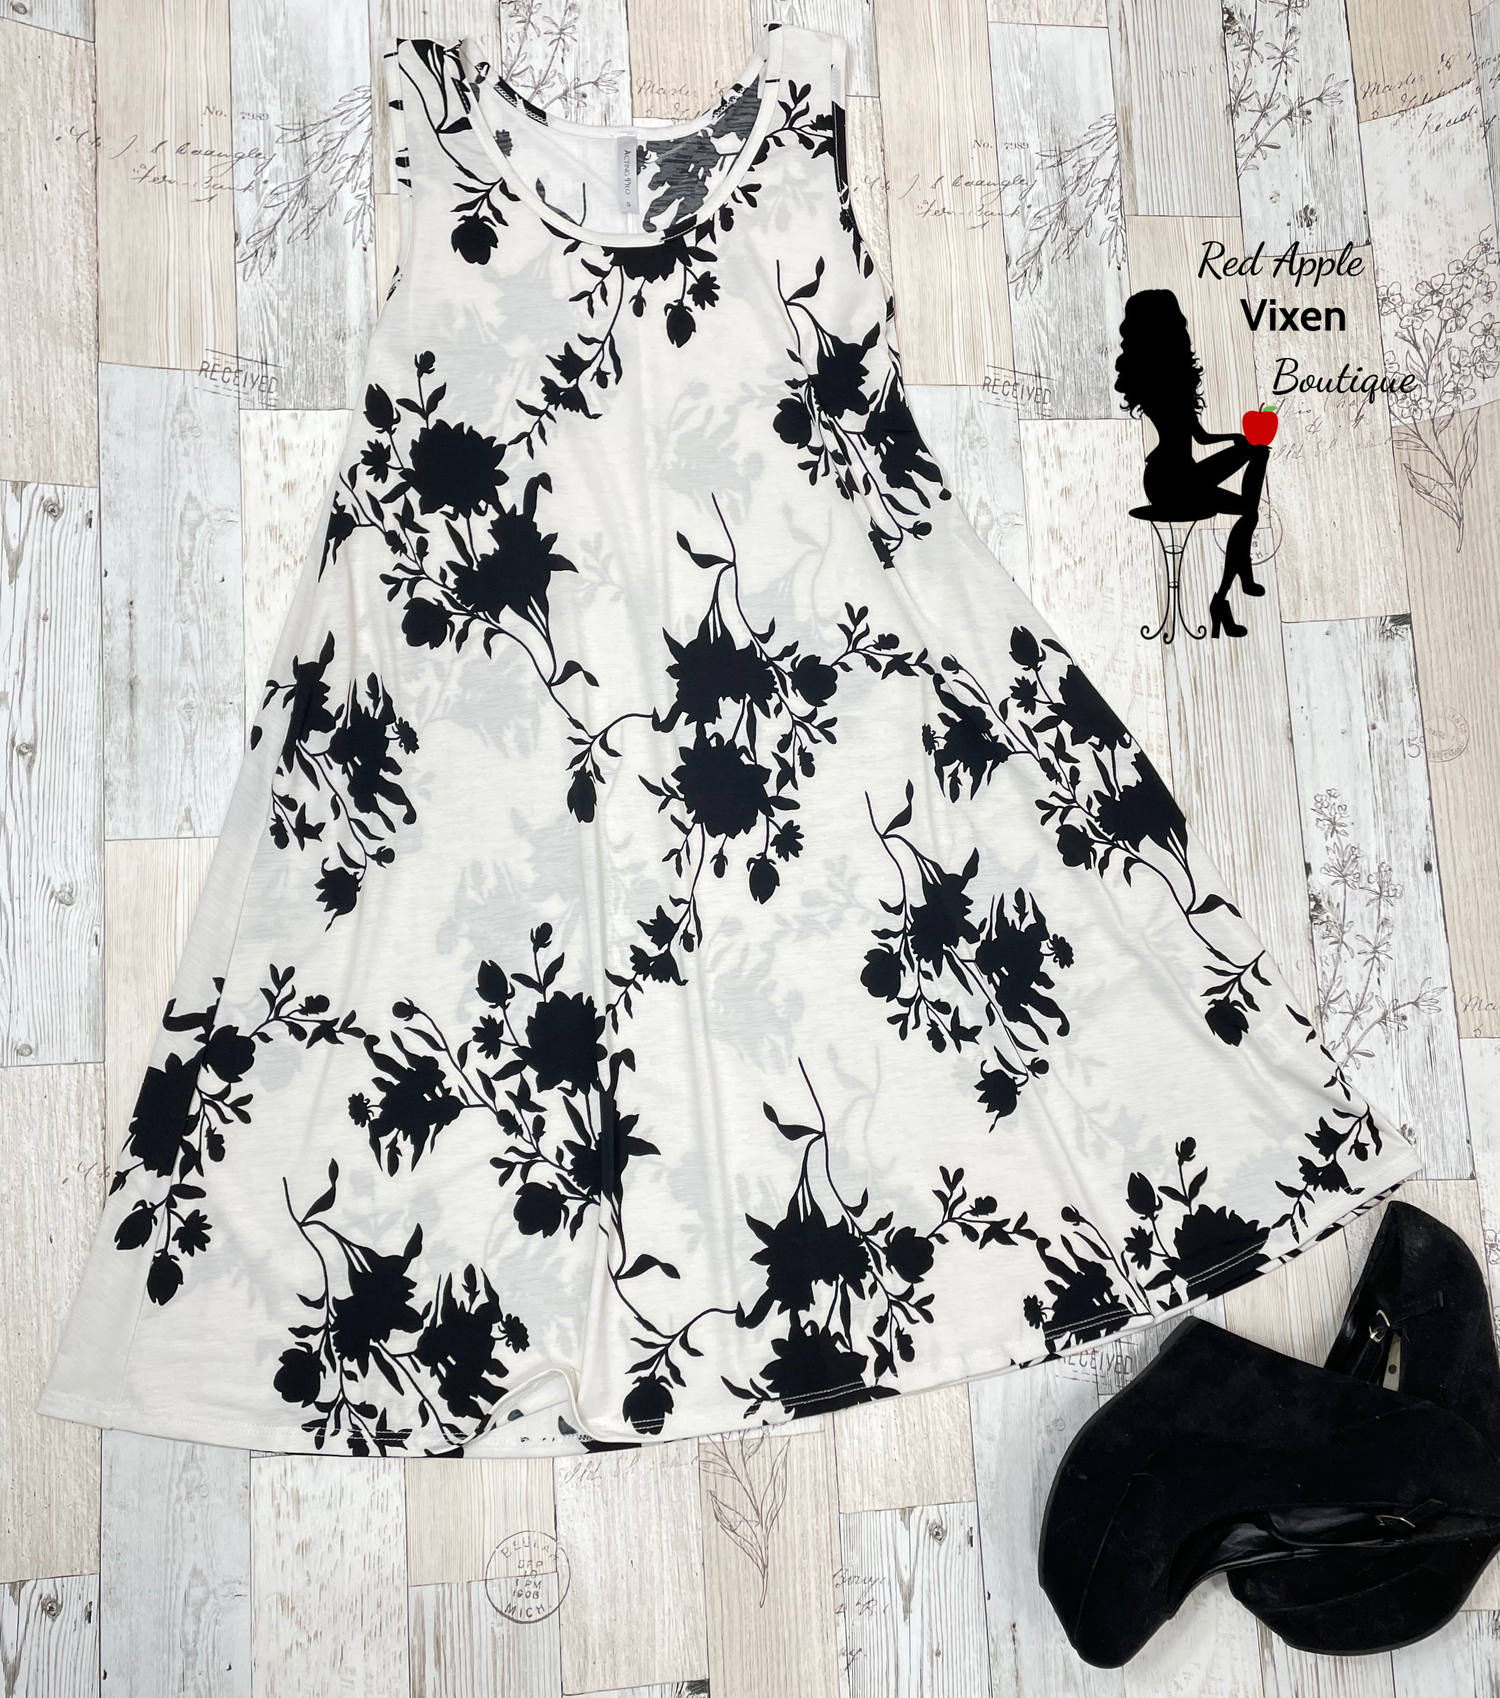 Black and White Floral Sleeveless Dress - Sassy Chick Clothing